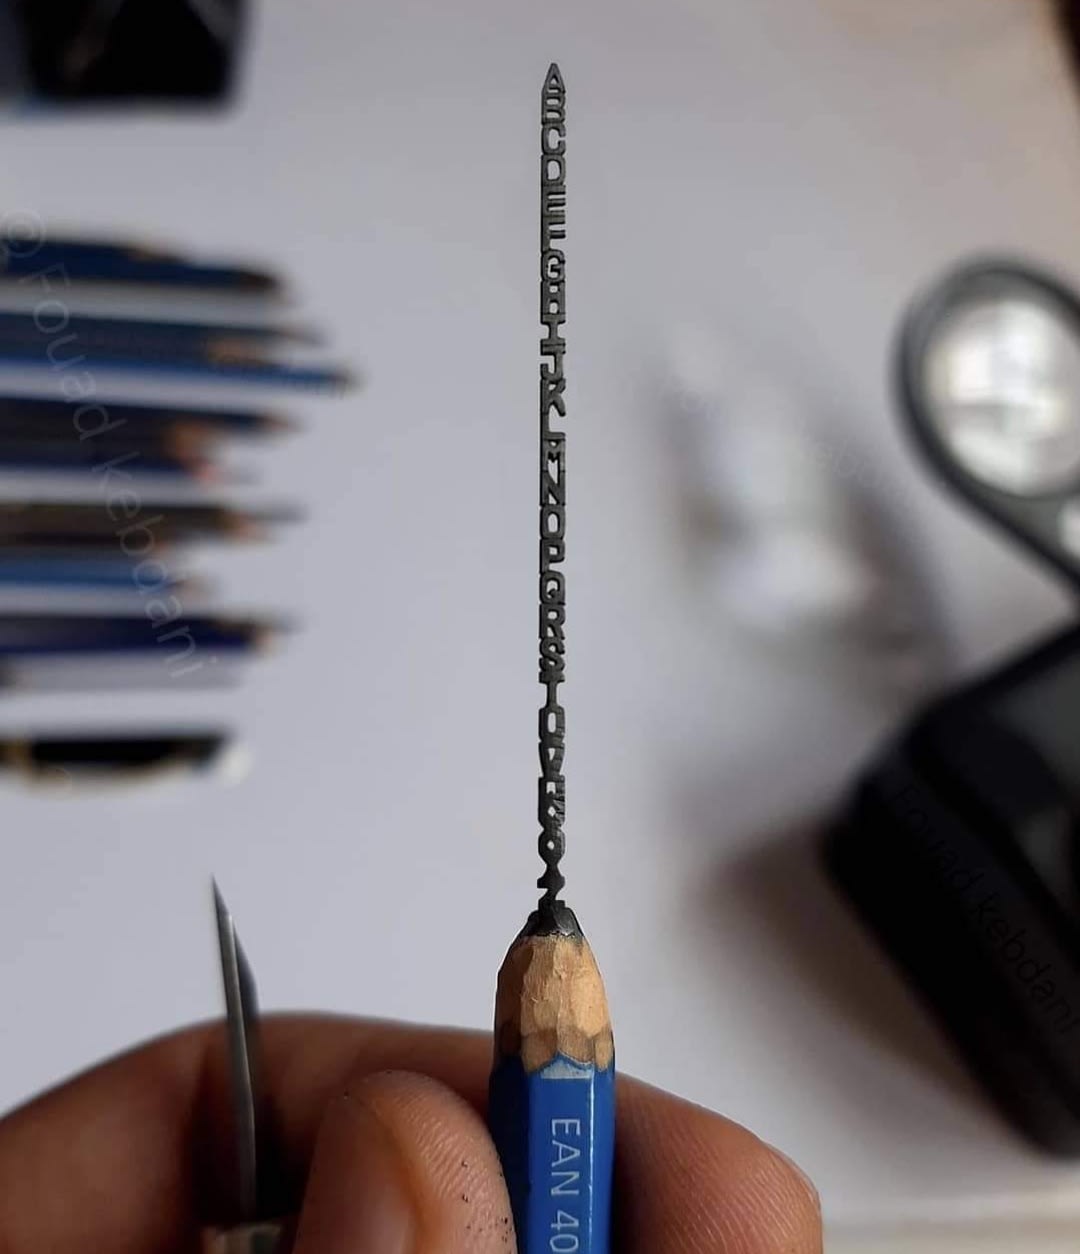 Carving the entire alphabet in pencil lead